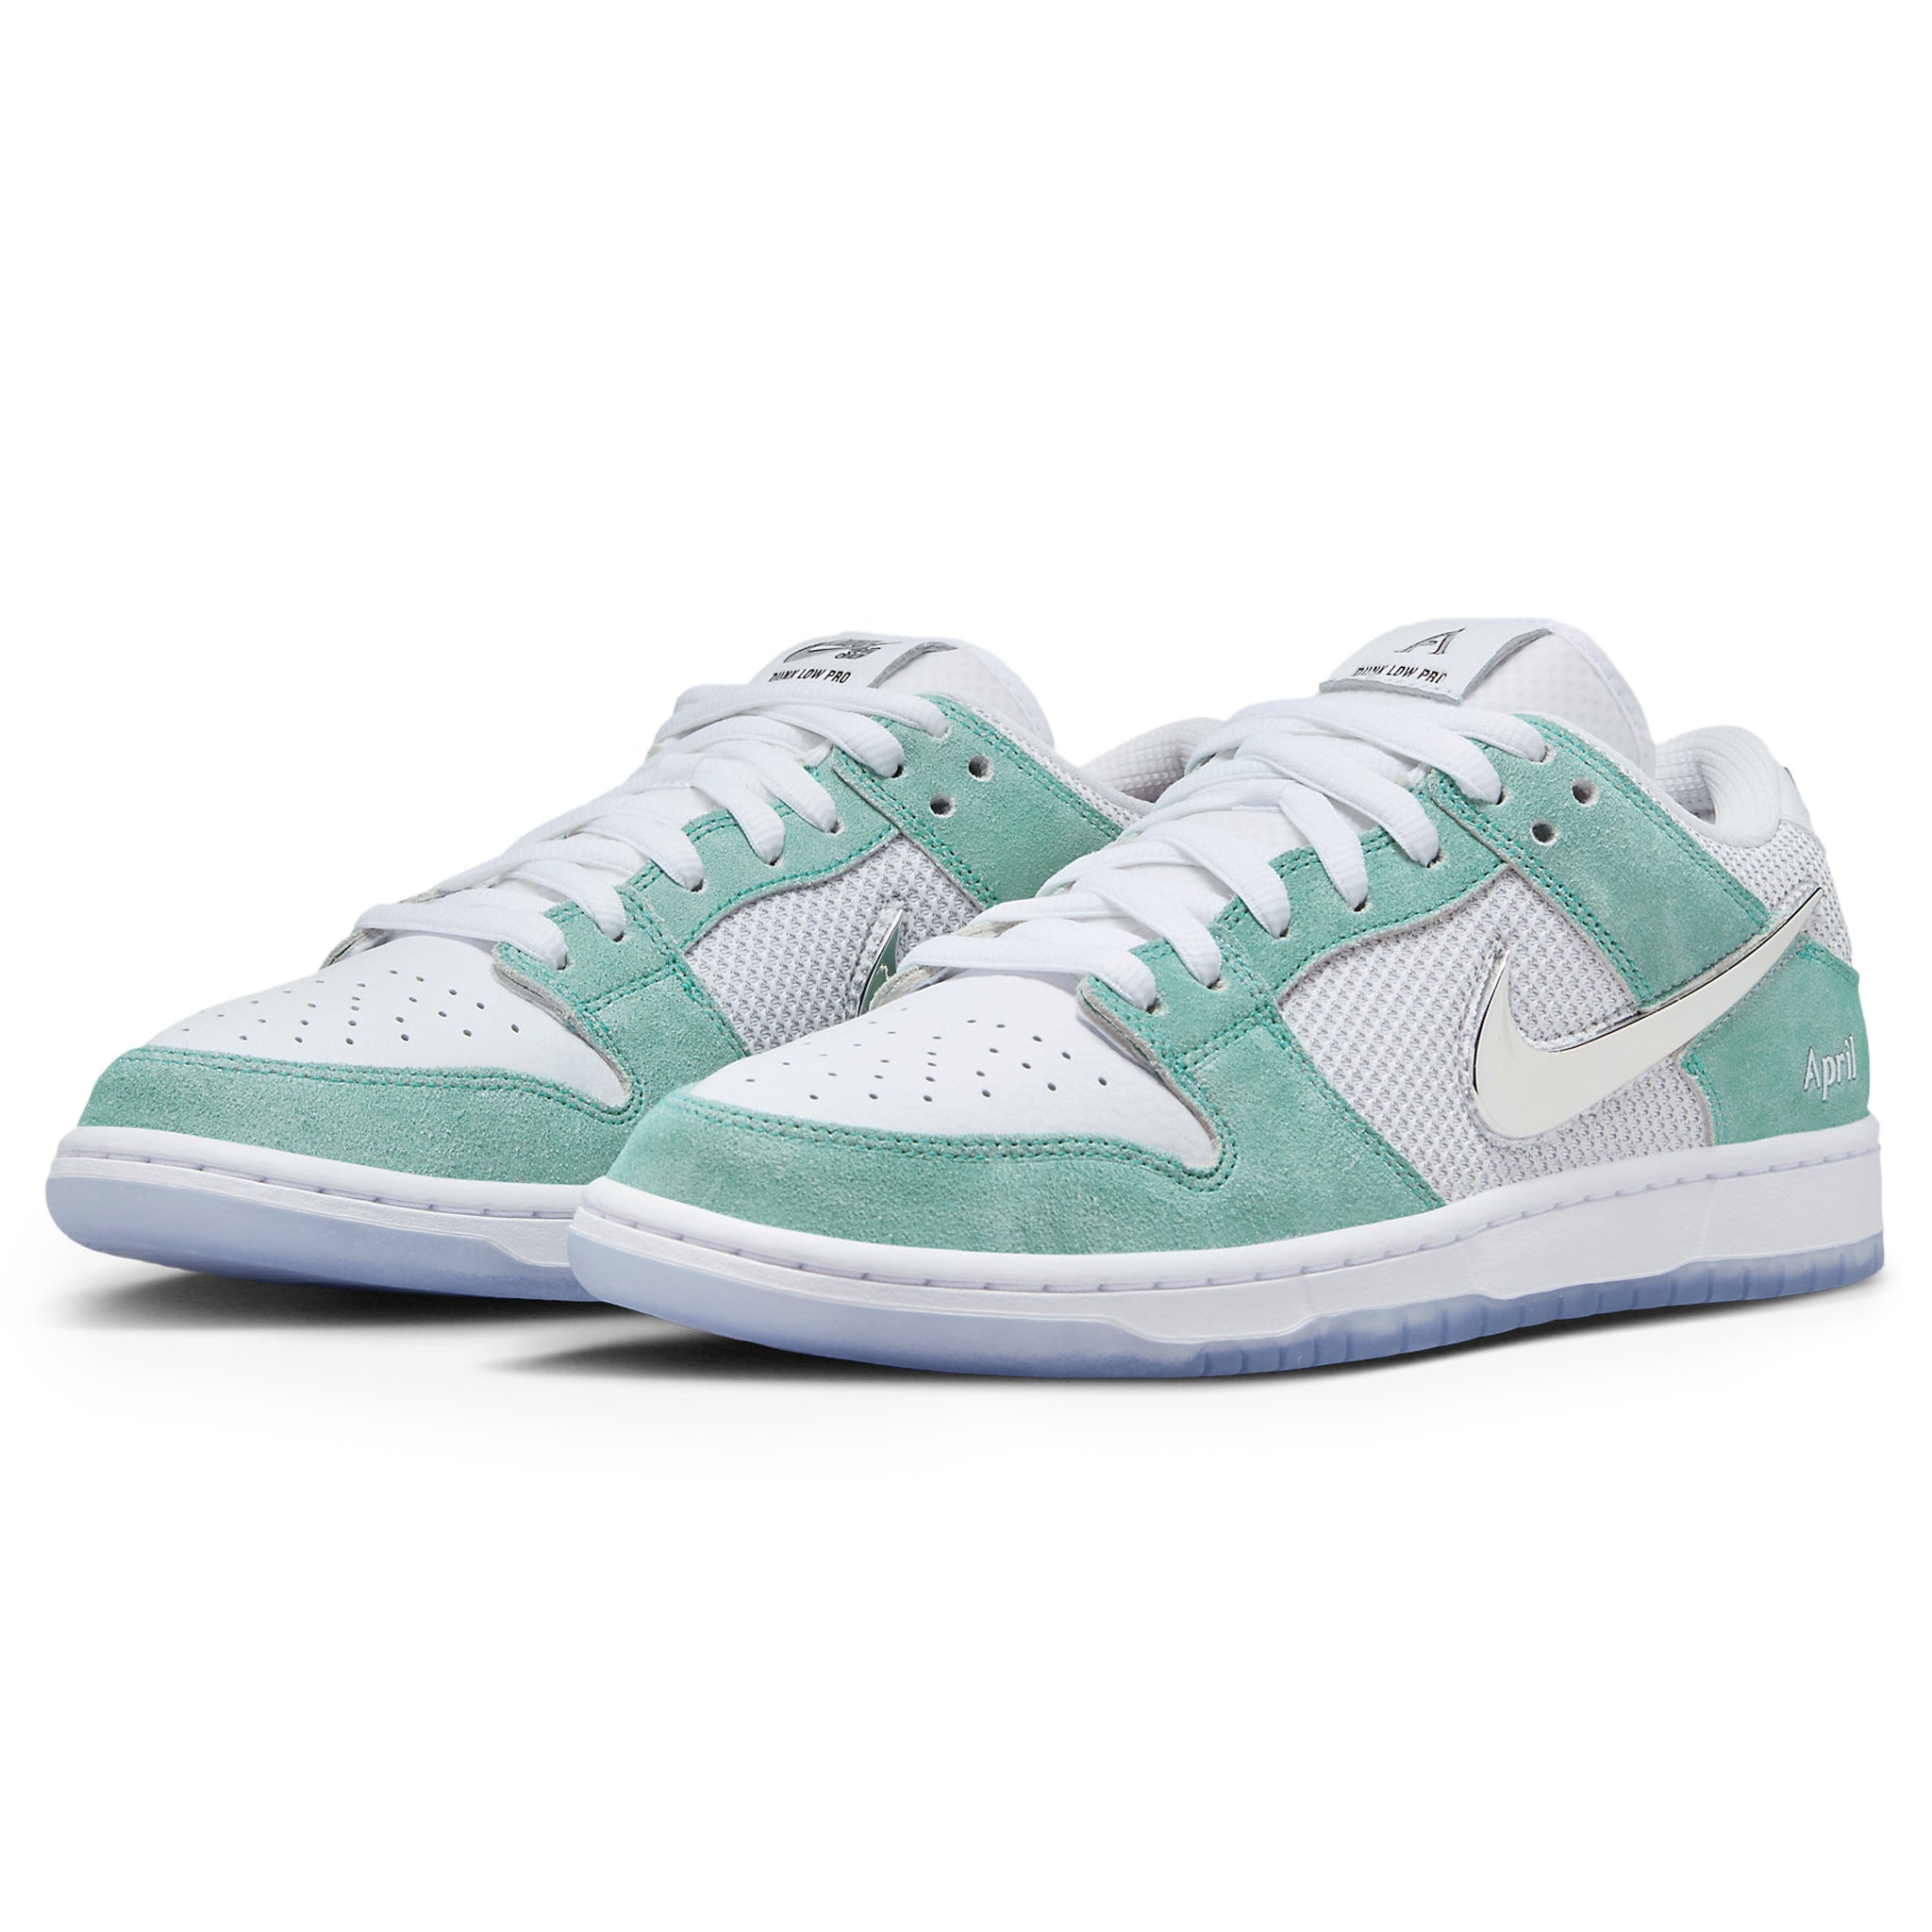 Front side view of April Skateboards x Nike SB Dunk Low Turbo Green FD2562-400